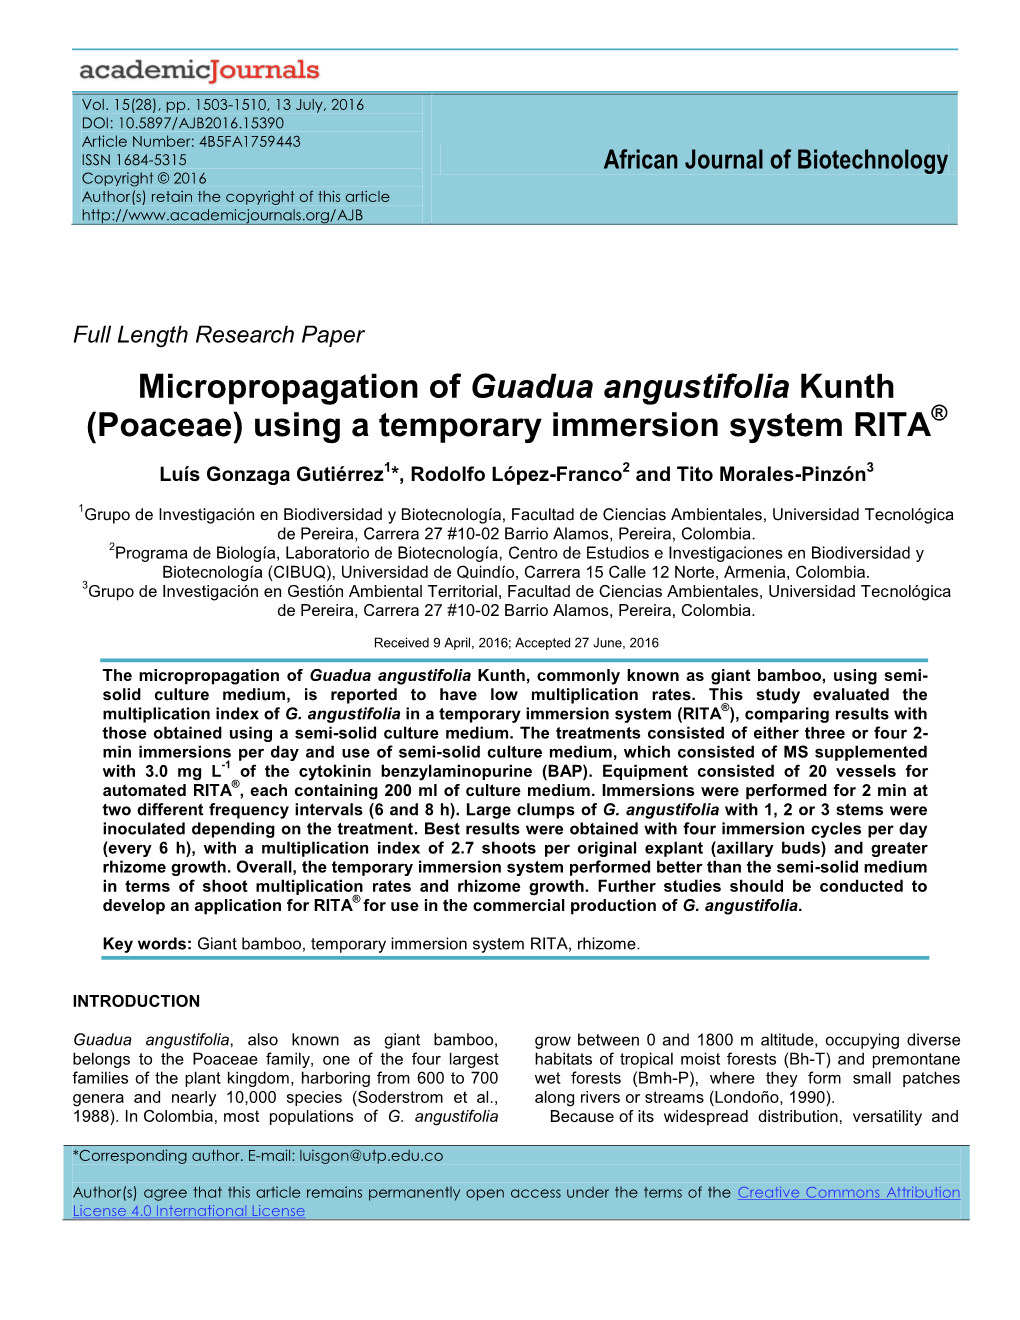 Micropropagation of Guadua Angustifolia Kunth (Poaceae) Using a Temporary Immersion System RITA®